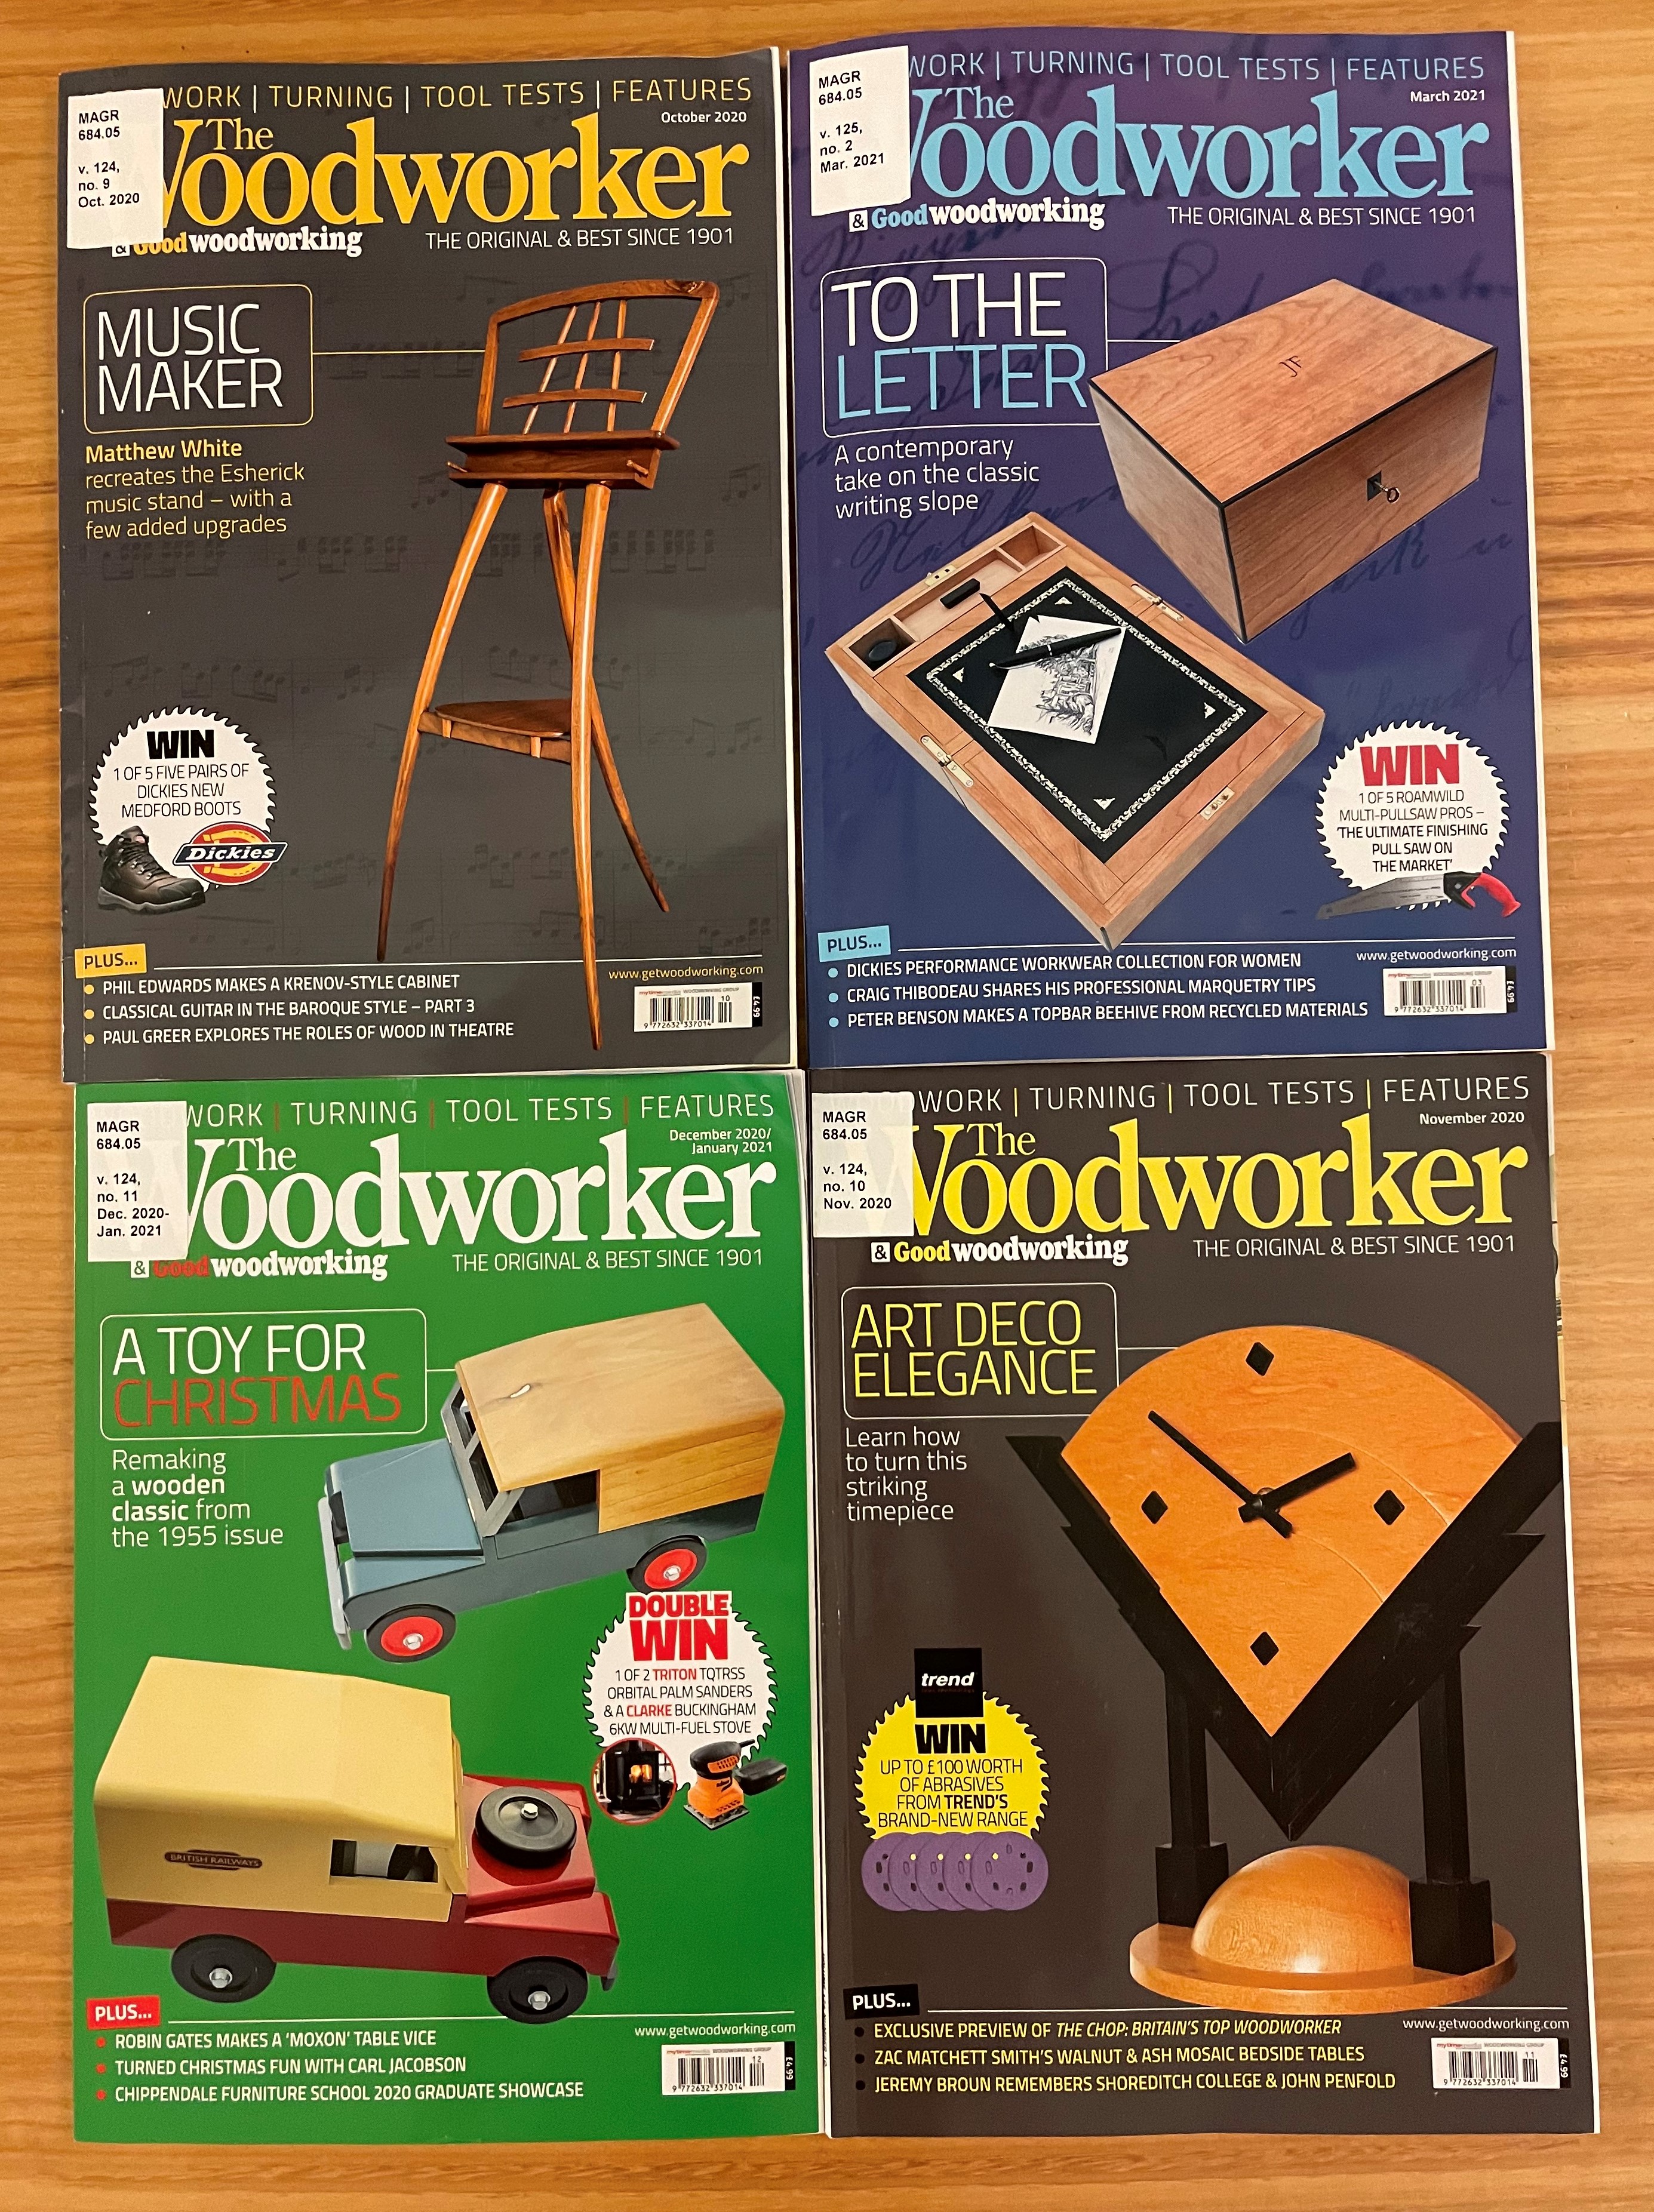 Image of four front covers of "The Woodworker & goodwoodworking" magazine displaying various wooden items